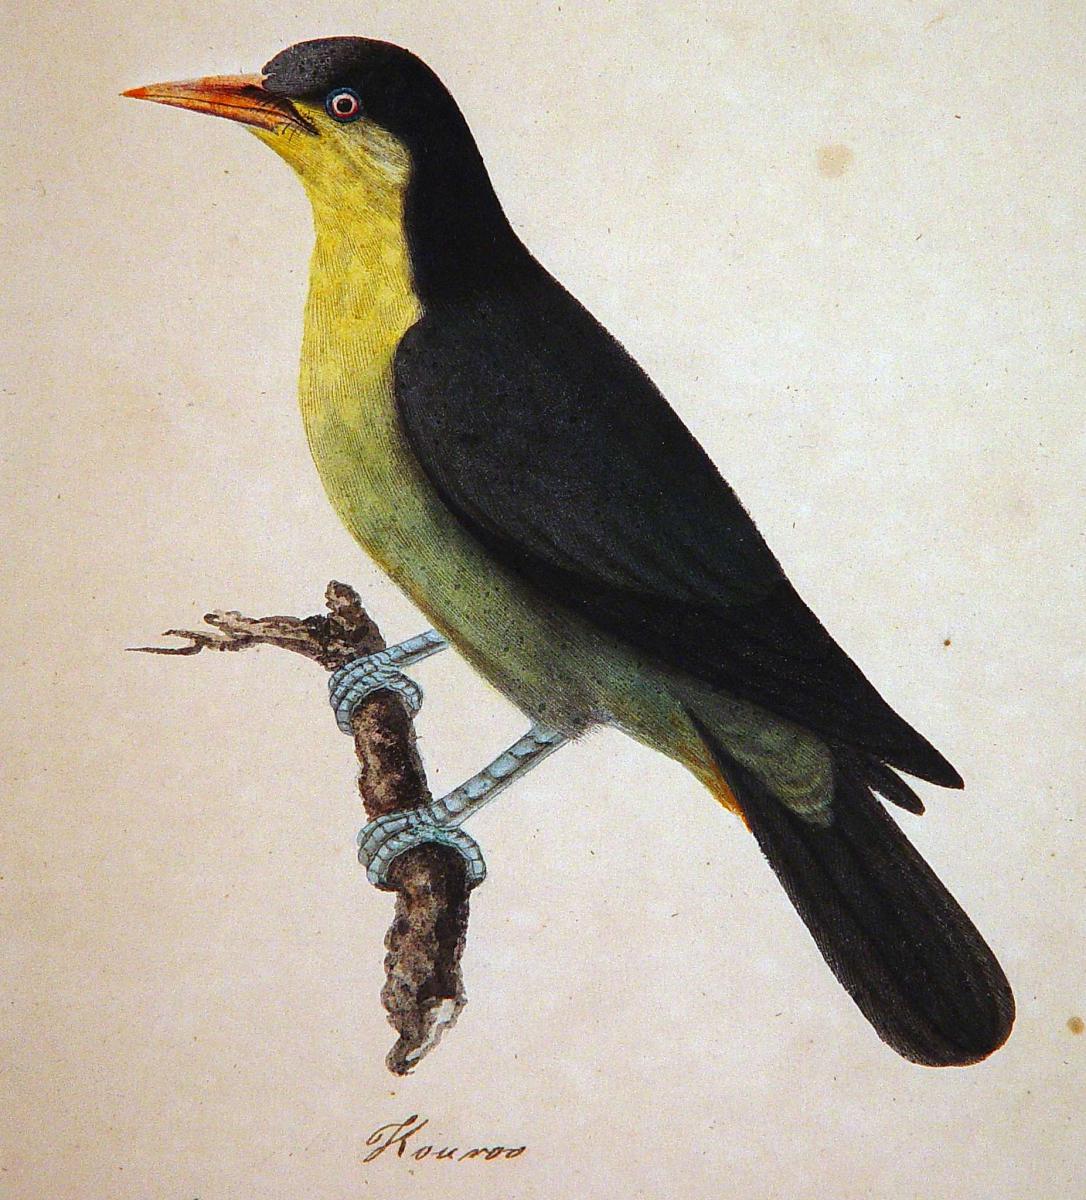 East India Company School Picture of a Bird, Titled Kouroo, India, Circa 1780-1820